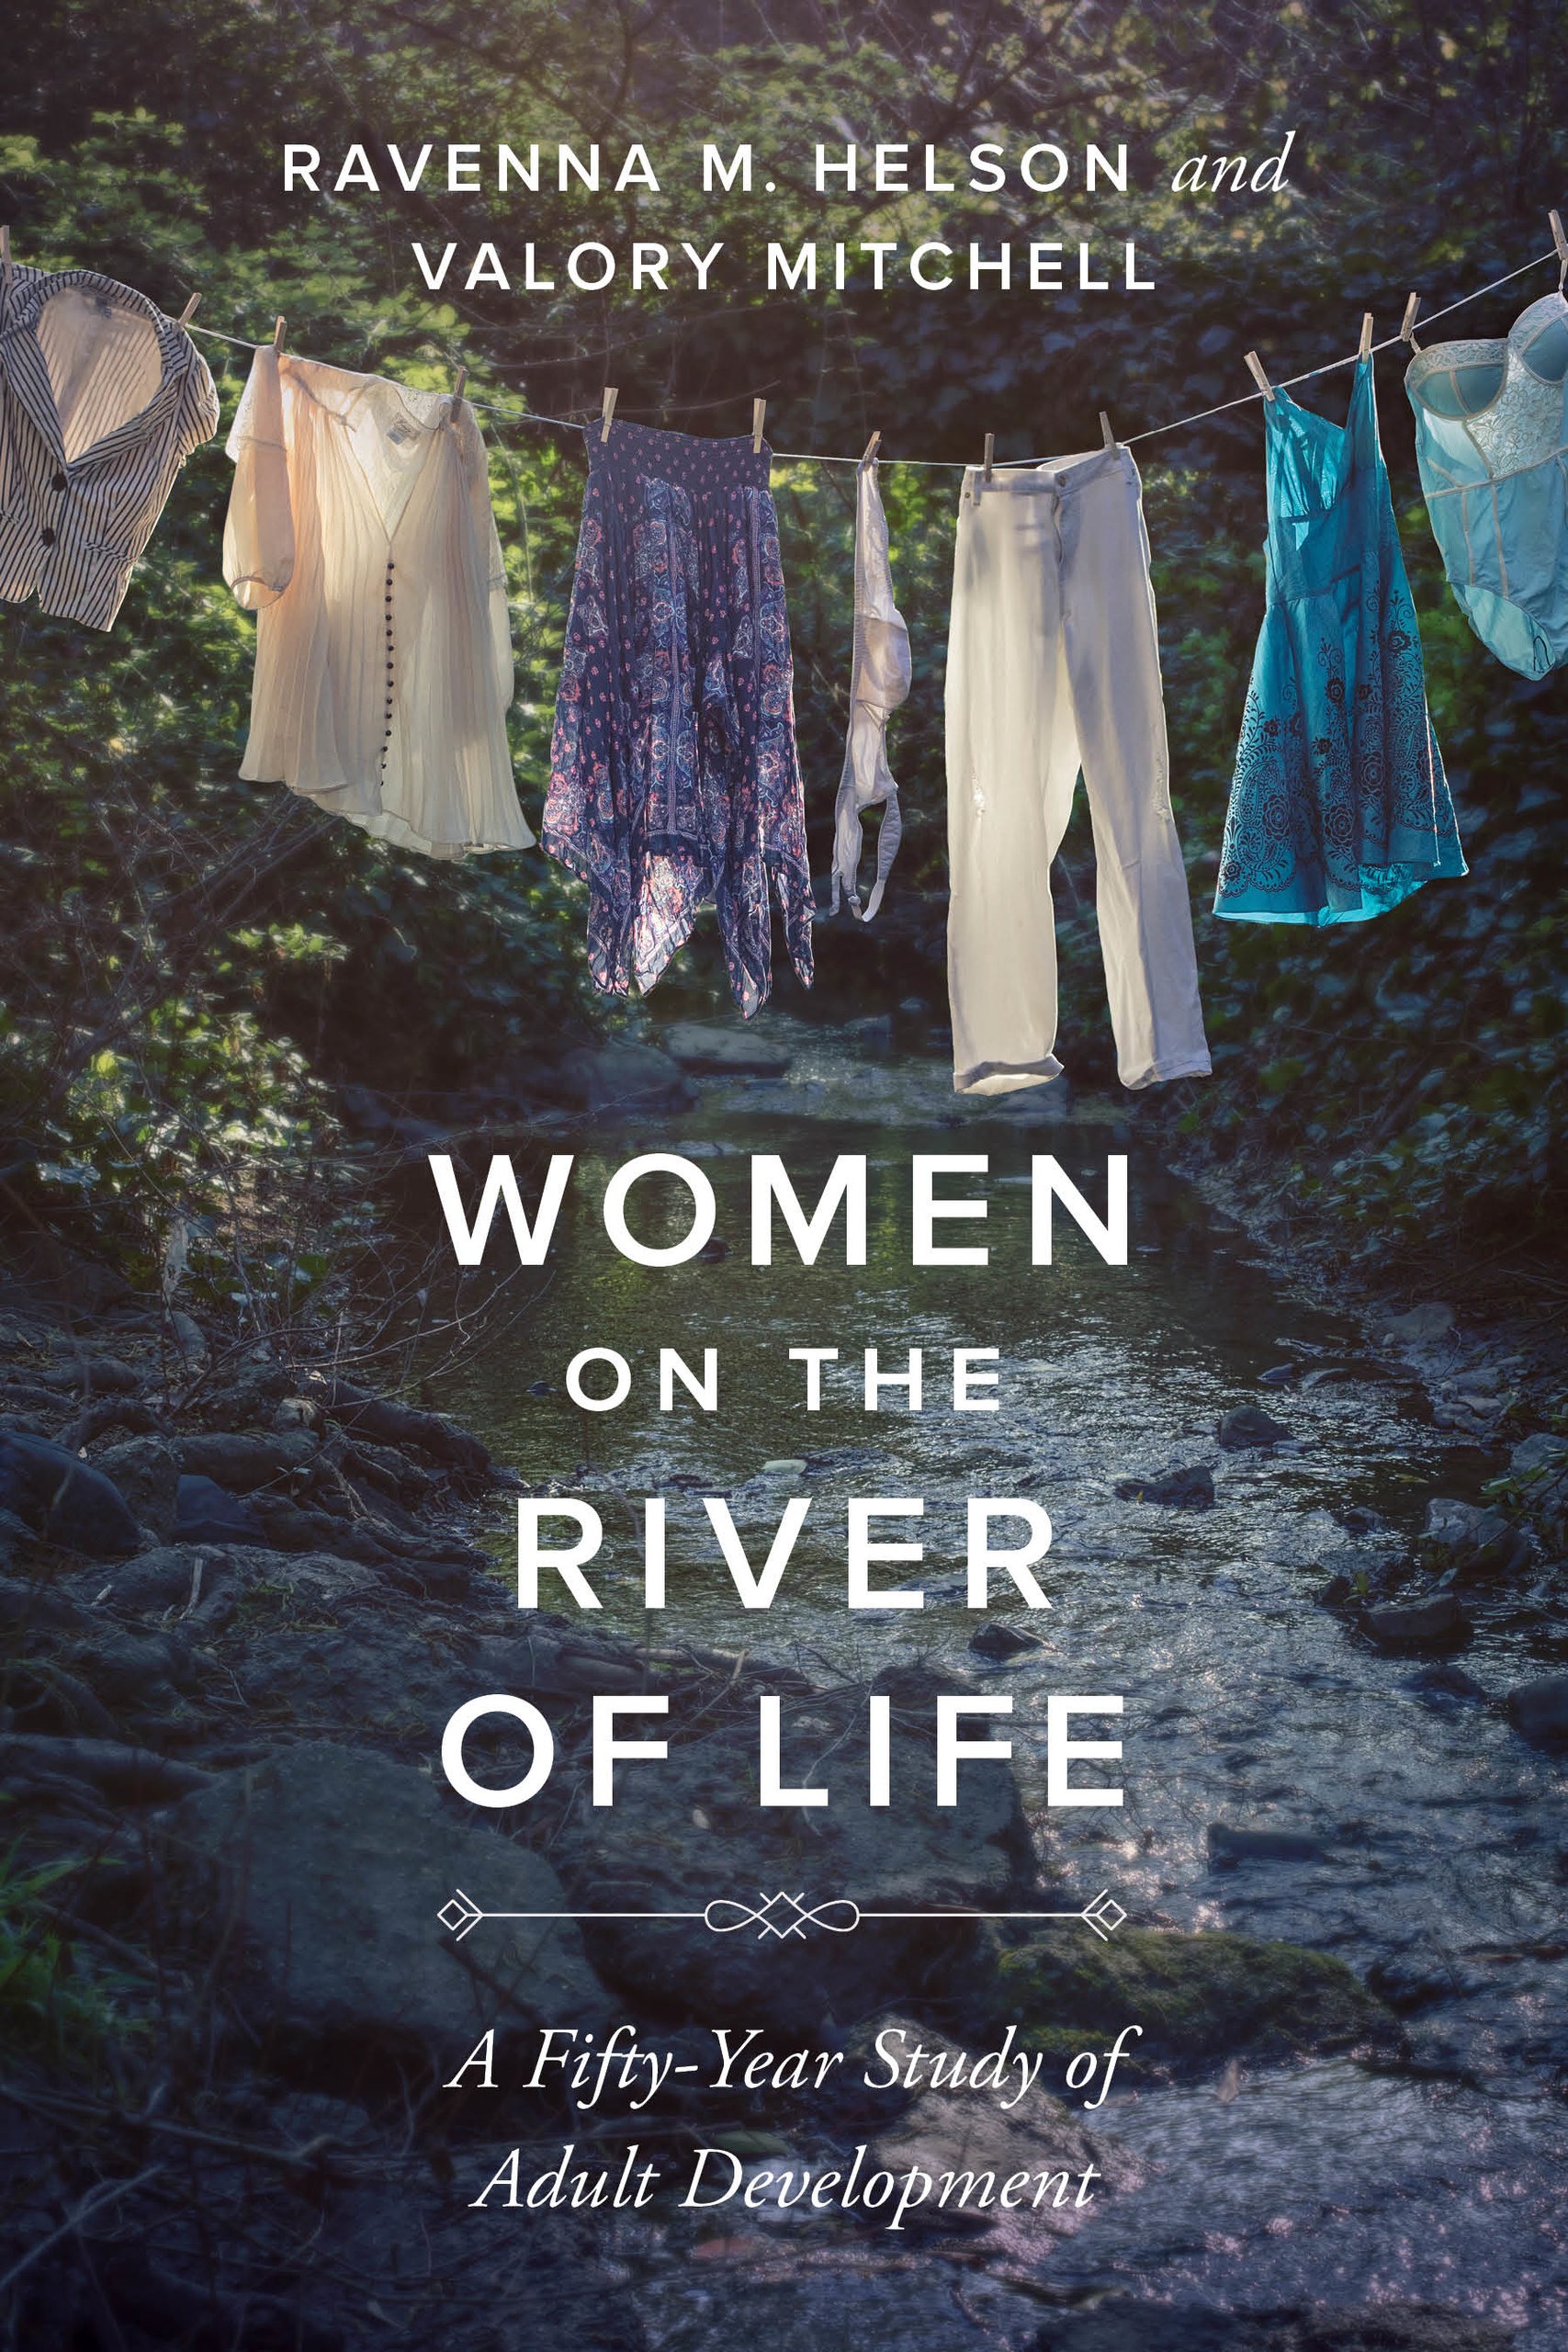 Ravenna Helson's final book in honor of the 60th anniversary of the Mills Longitudinal Study (published in November 2020). "Woven throughout the book are the authors’ reminiscences on the profound endeavor of sustaining a longitudinal study of women’s lives through time." -Univ. of California Press.